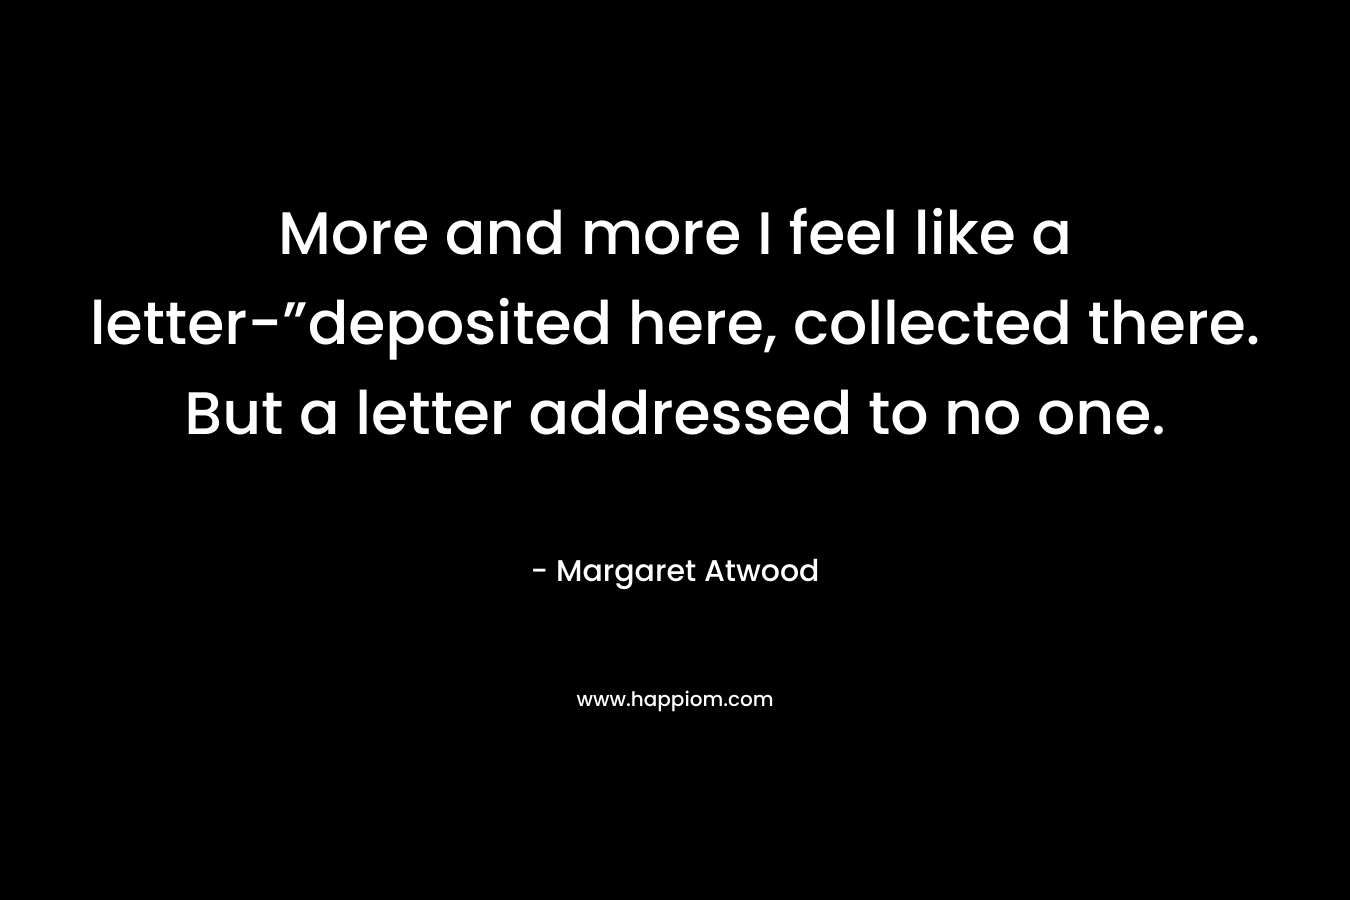 More and more I feel like a letter-”deposited here, collected there. But a letter addressed to no one.